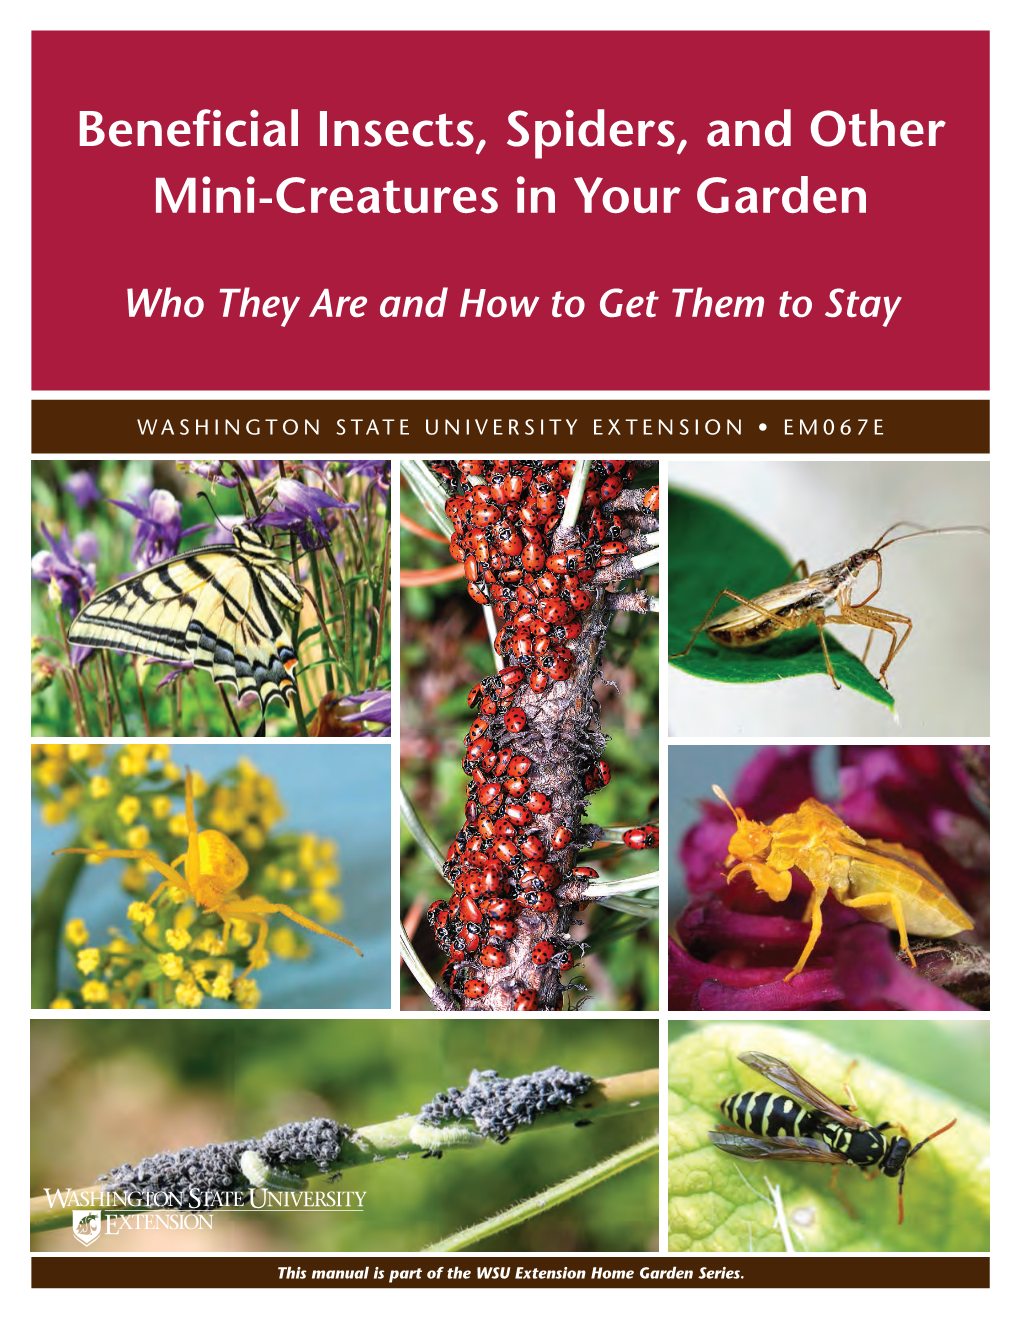 Beneficial Insects, Spiders, and Other Mini-Creatures in Your Garden